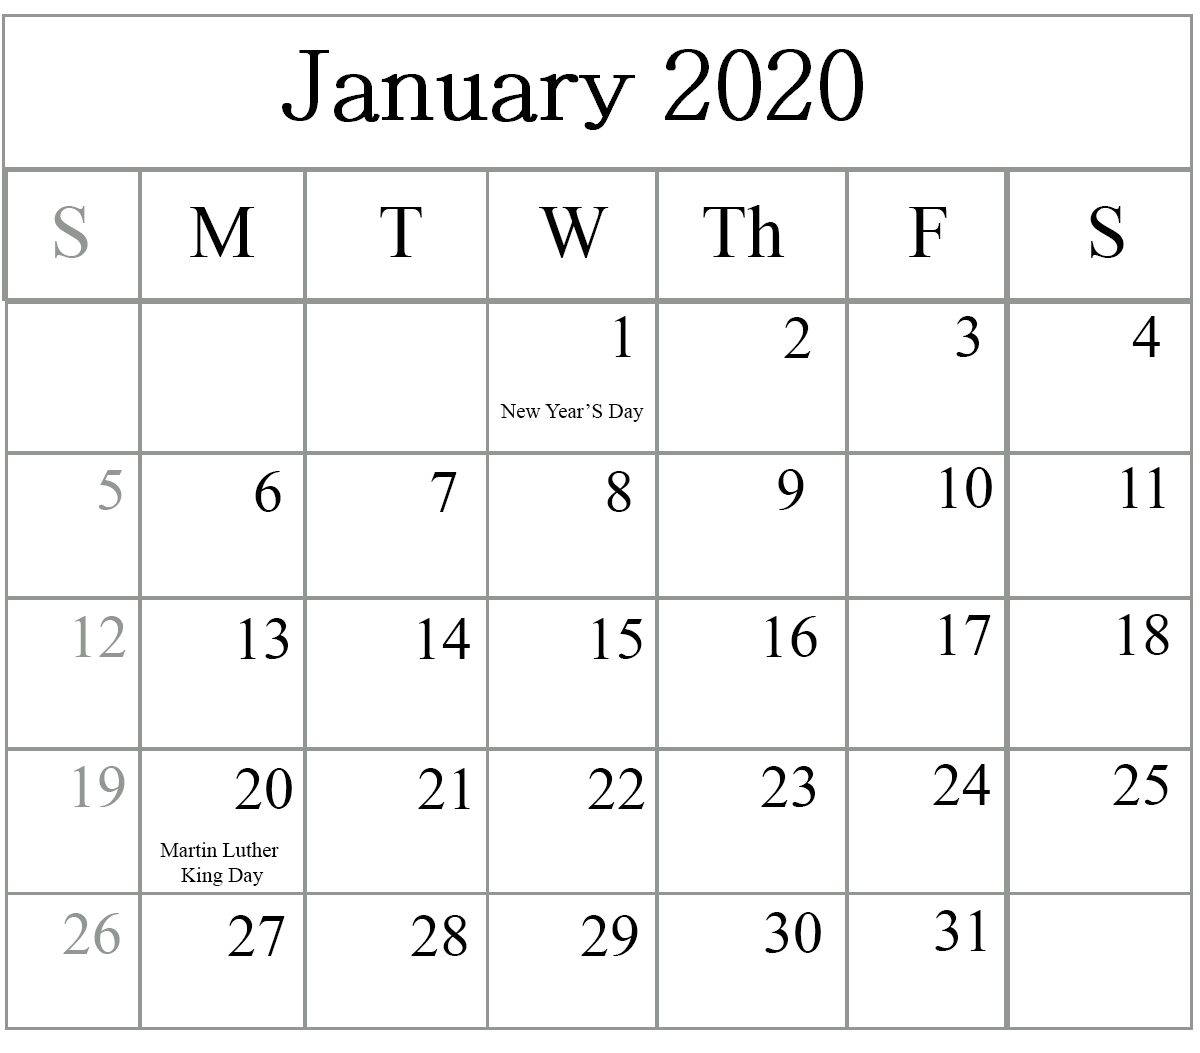 January 2020 Calendar Template : Record Your Personal And